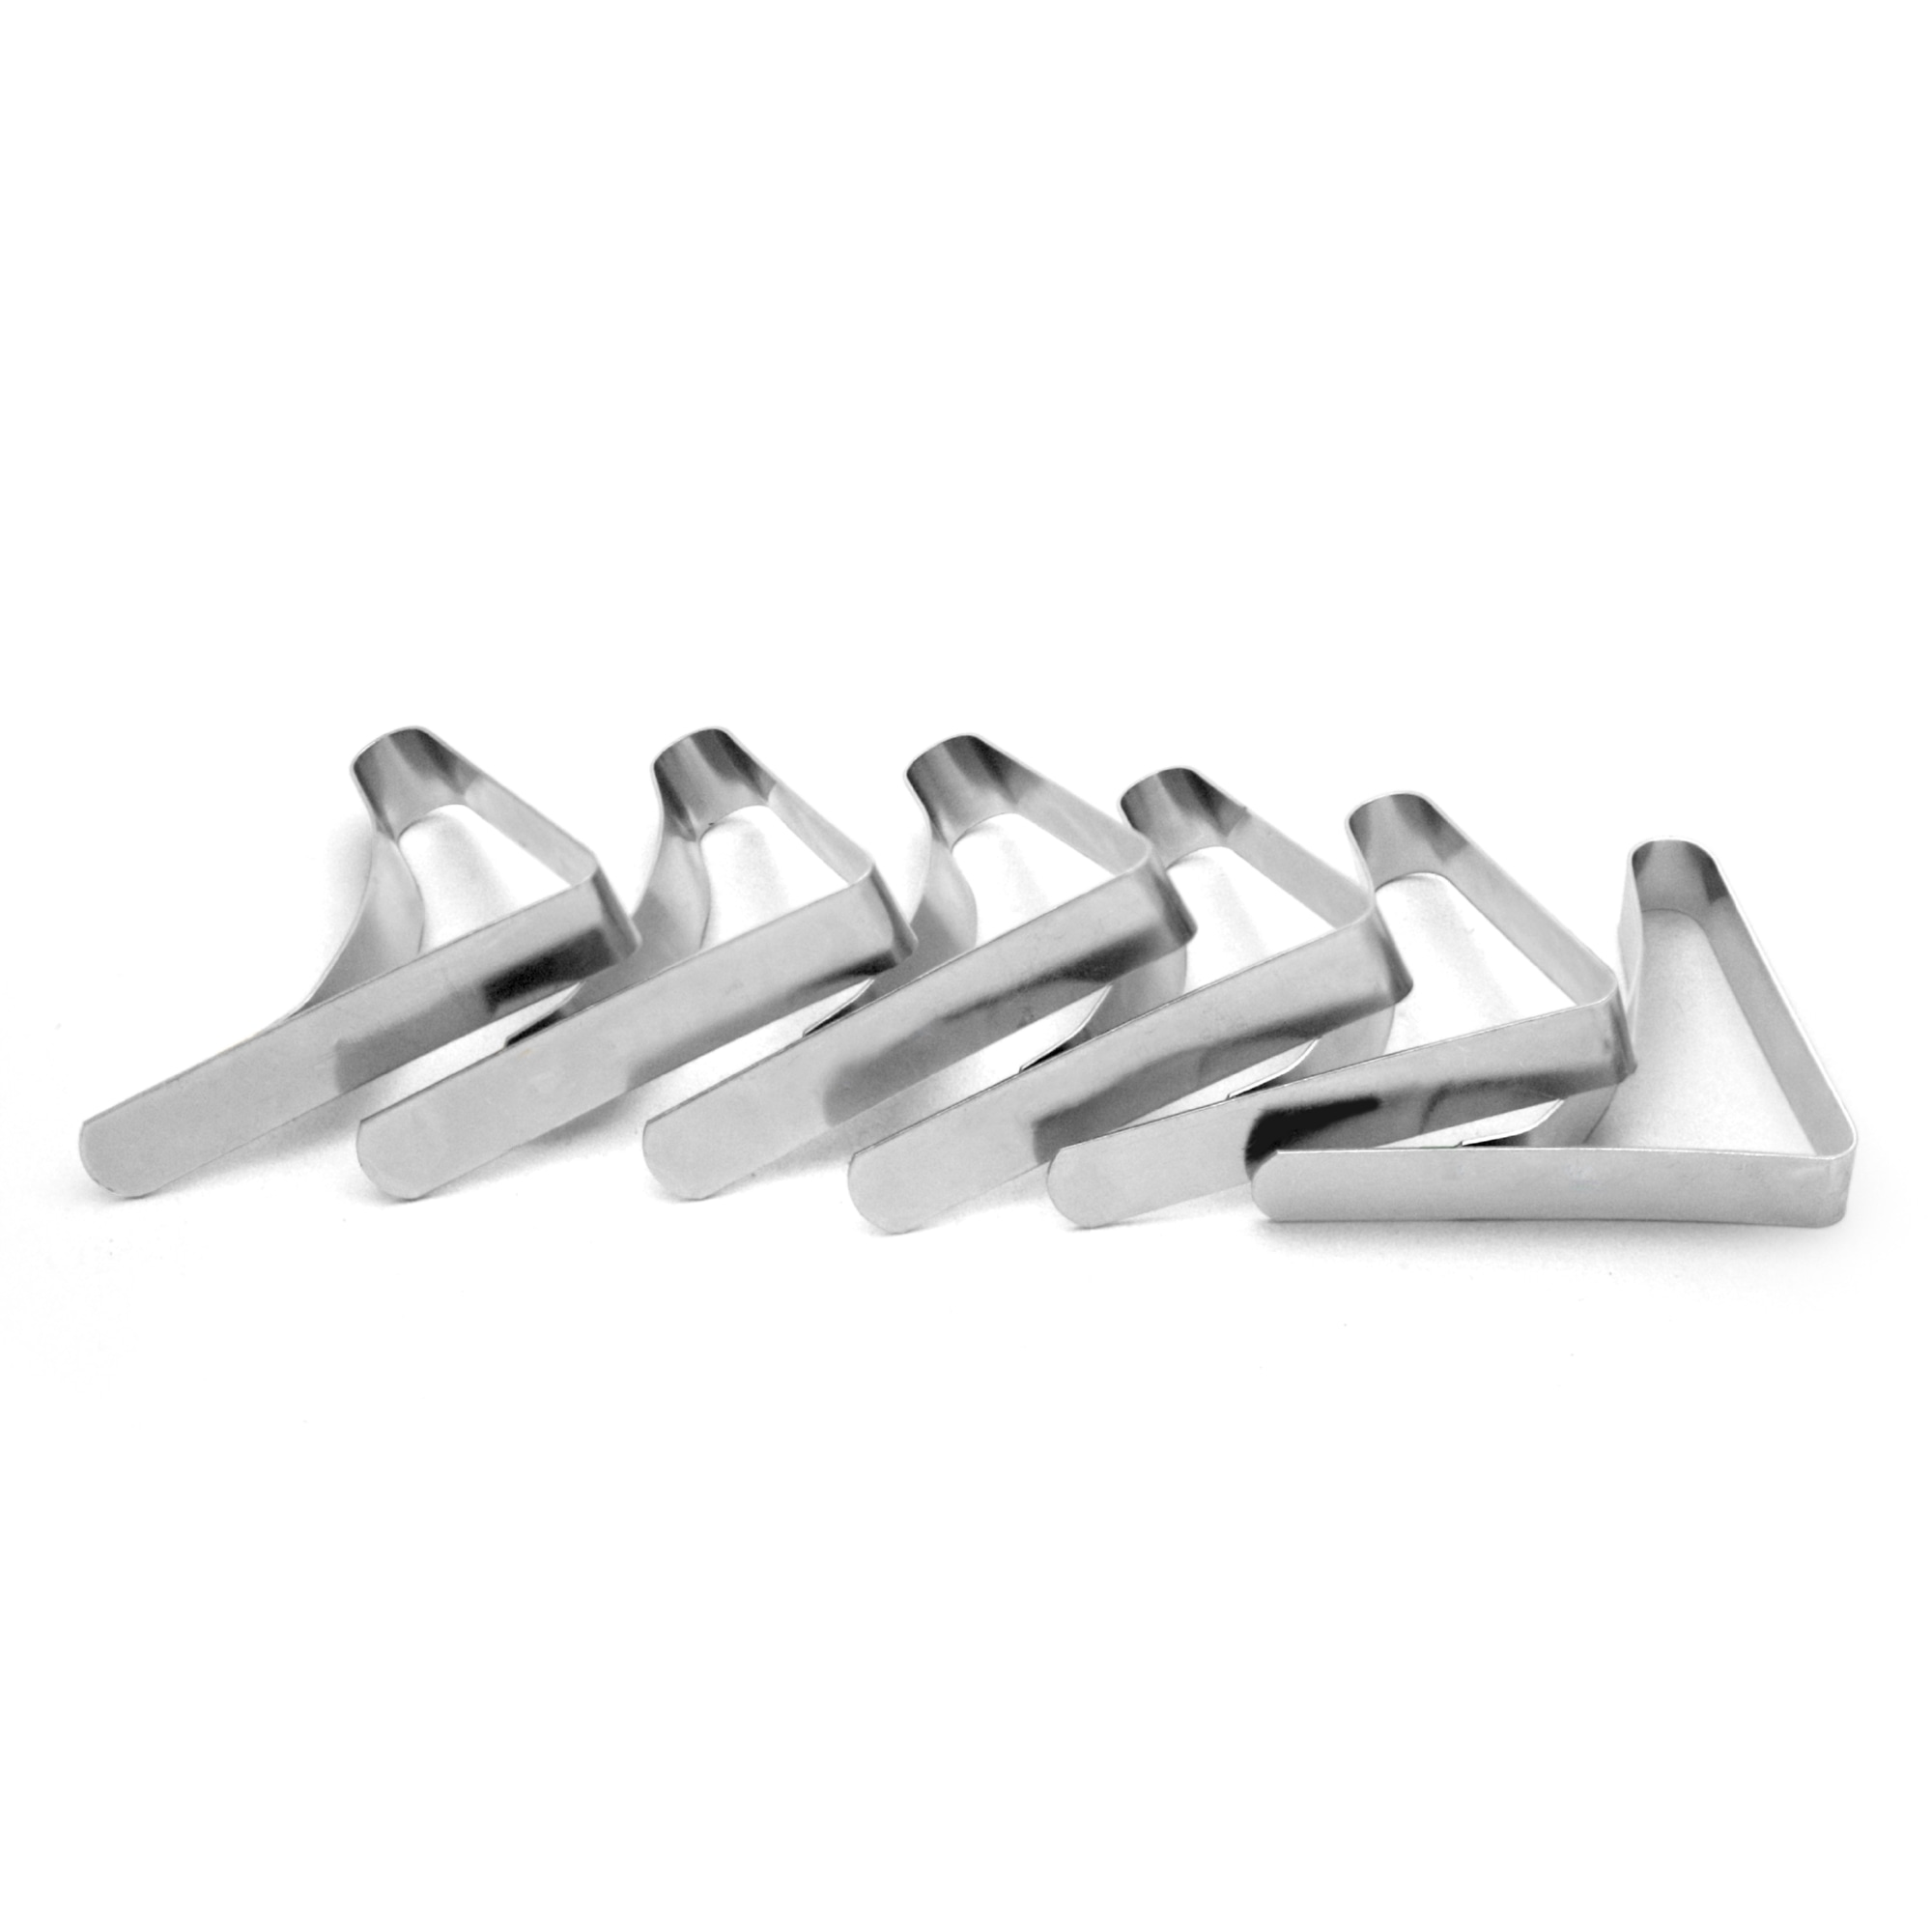 Tablecloth Clamps 6 Pack